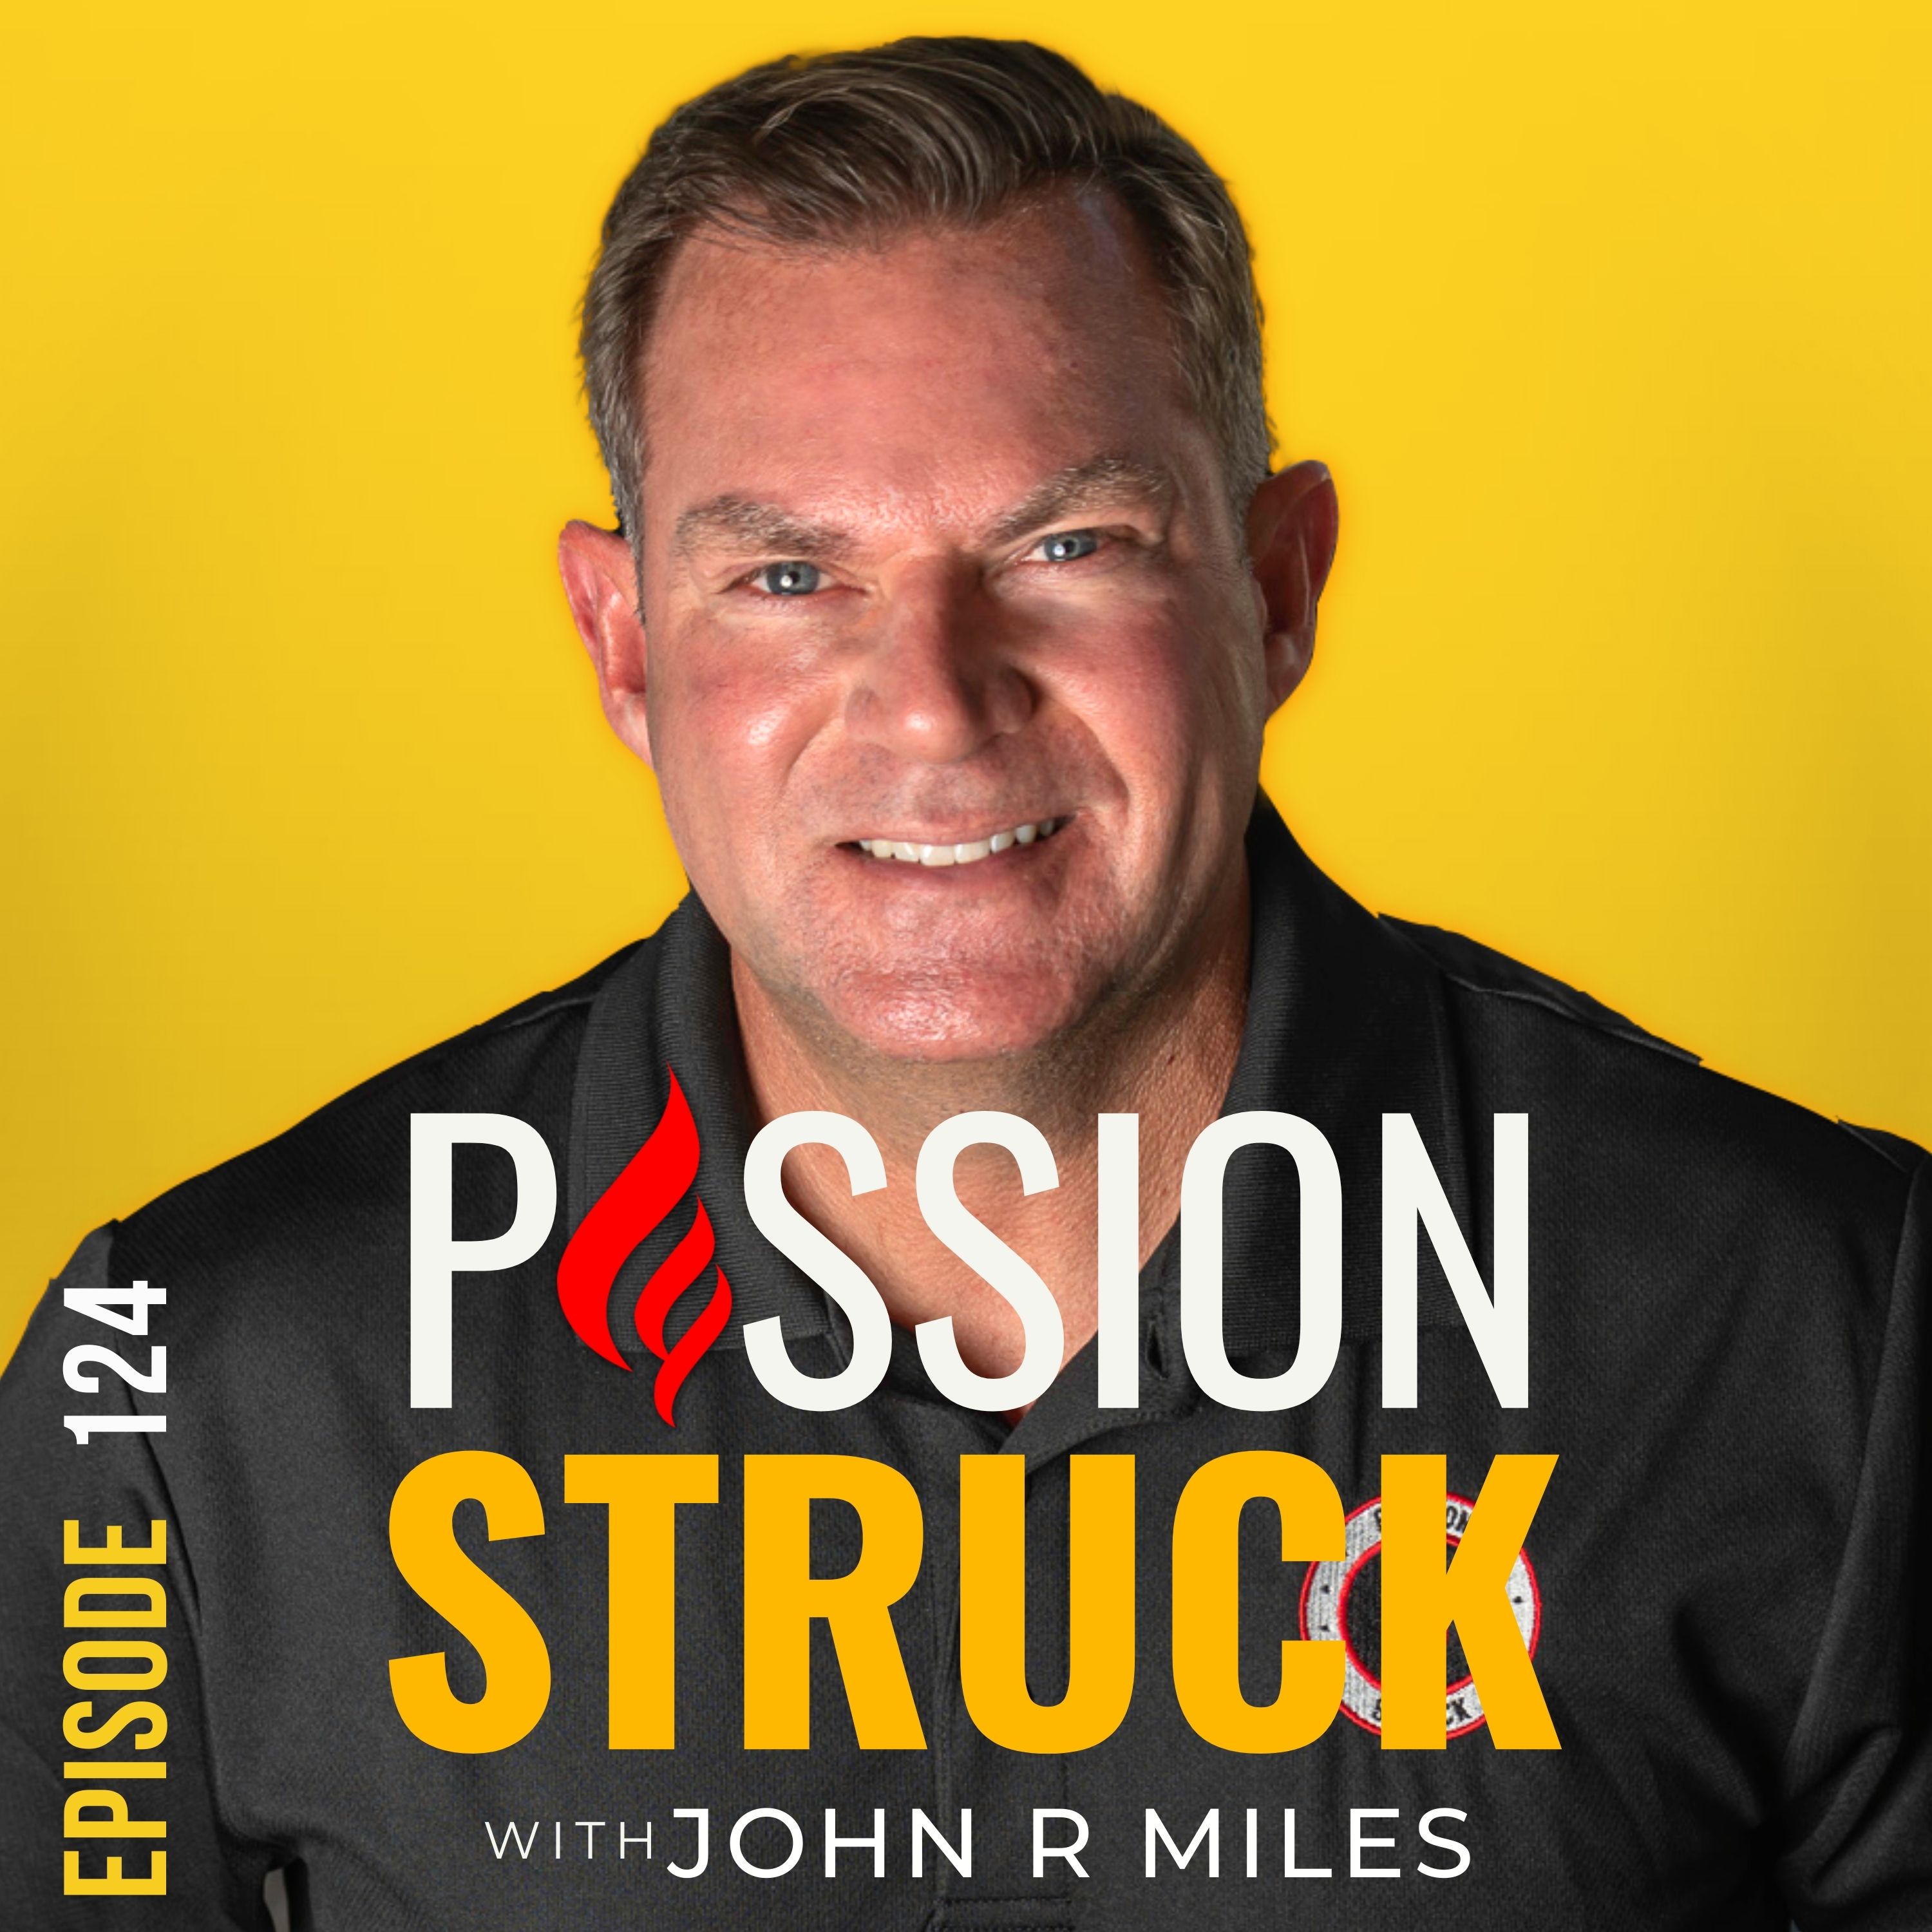 Passion Struck with John R Miles Episode 124 on work life balance and creating a balanced life